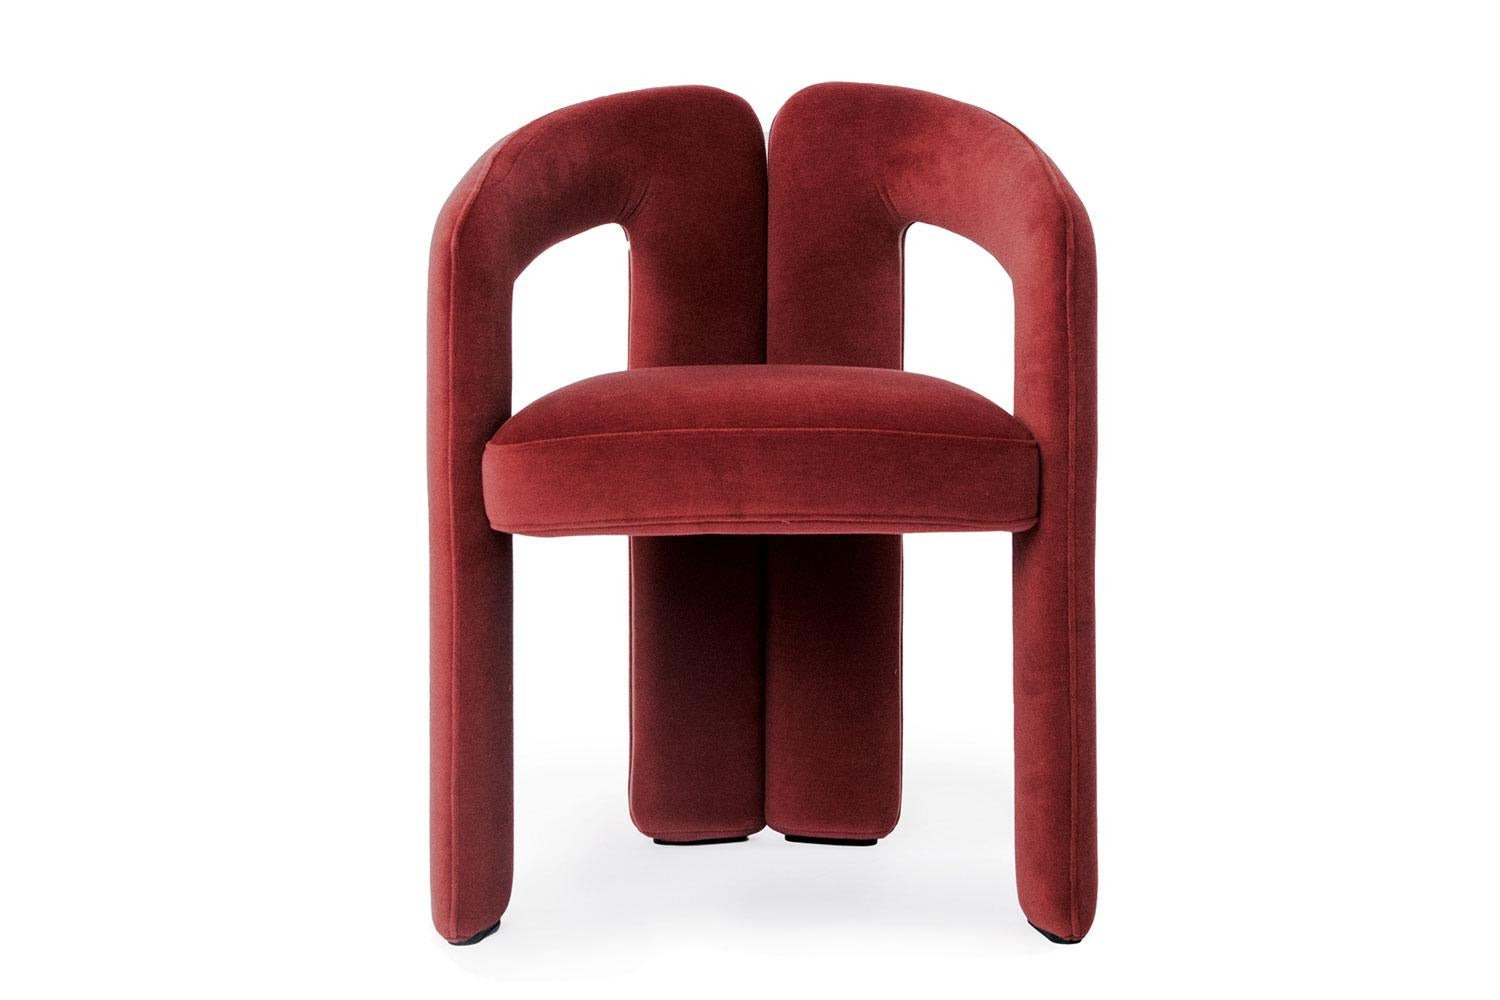 Dudet Armchair by Cassina.

Designed by Patricia Urquiola, Dudet has a soft, enveloping shape that offers contemporary comfort with a well-developed sense of 
environmental awareness. This small armchair, which strongly references 1970s design, is